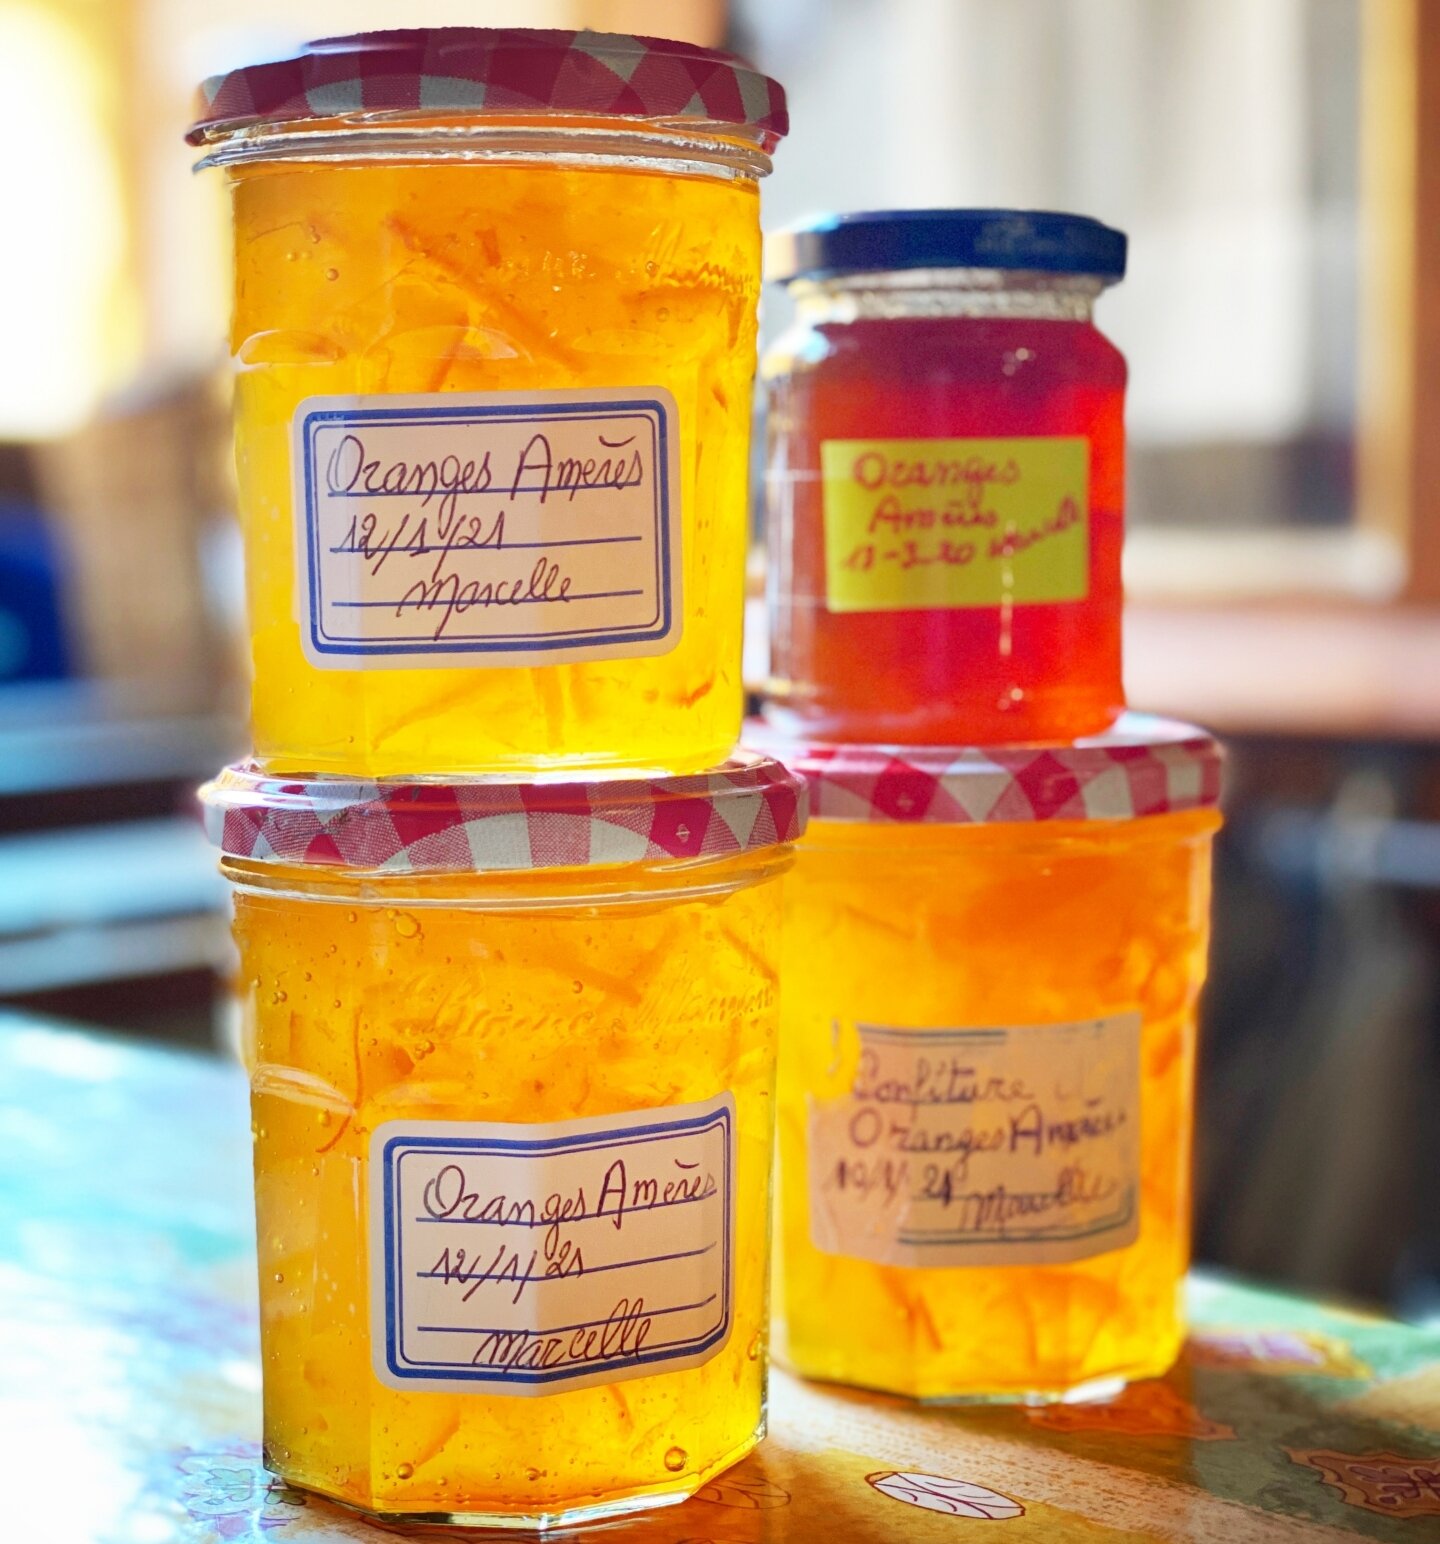 The bitter-orange marmelade made by Marie Marcelle Resch, who made over 300 jars of marmalade this season, as well as several dozen fruit cakes. These are simply to give away - to the local policeman, to neighbors, to all sorts of people. She has a h